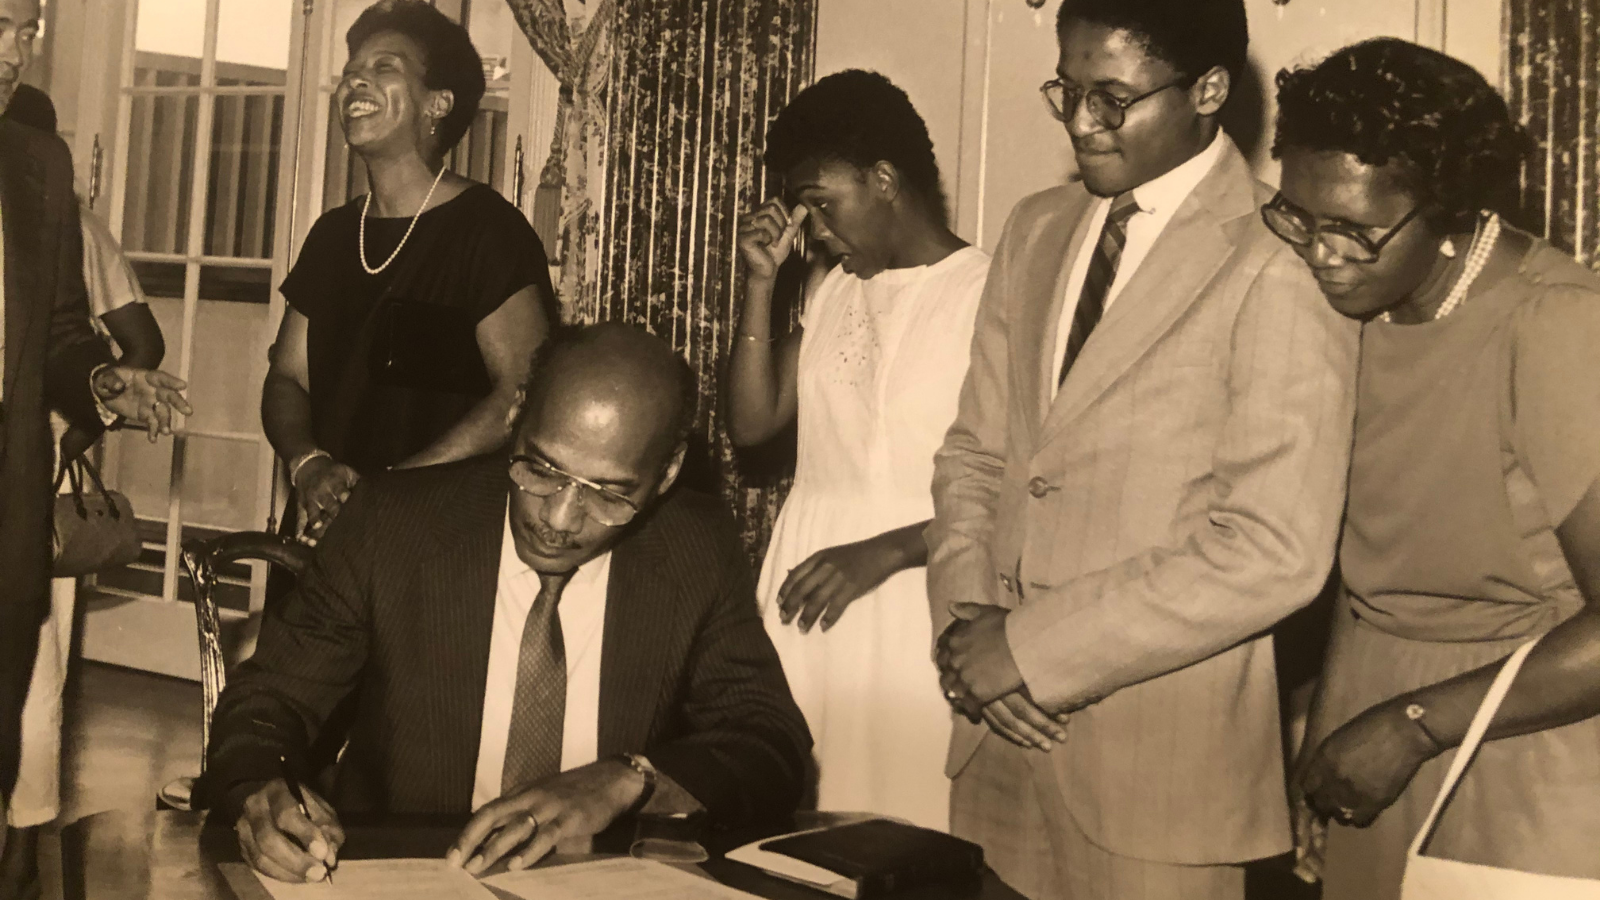 Irv Hicks Jr., along with the Hicks family, witnesses his father, Irvin Hicks, Sr. sign the papers to serve as U.S. Ambassador to Seychelles in 1985. This was Hicks Sr.’s first of three ambassadorships, including the Seychelles, Deputy Representative to the UN, and Ethiopia.